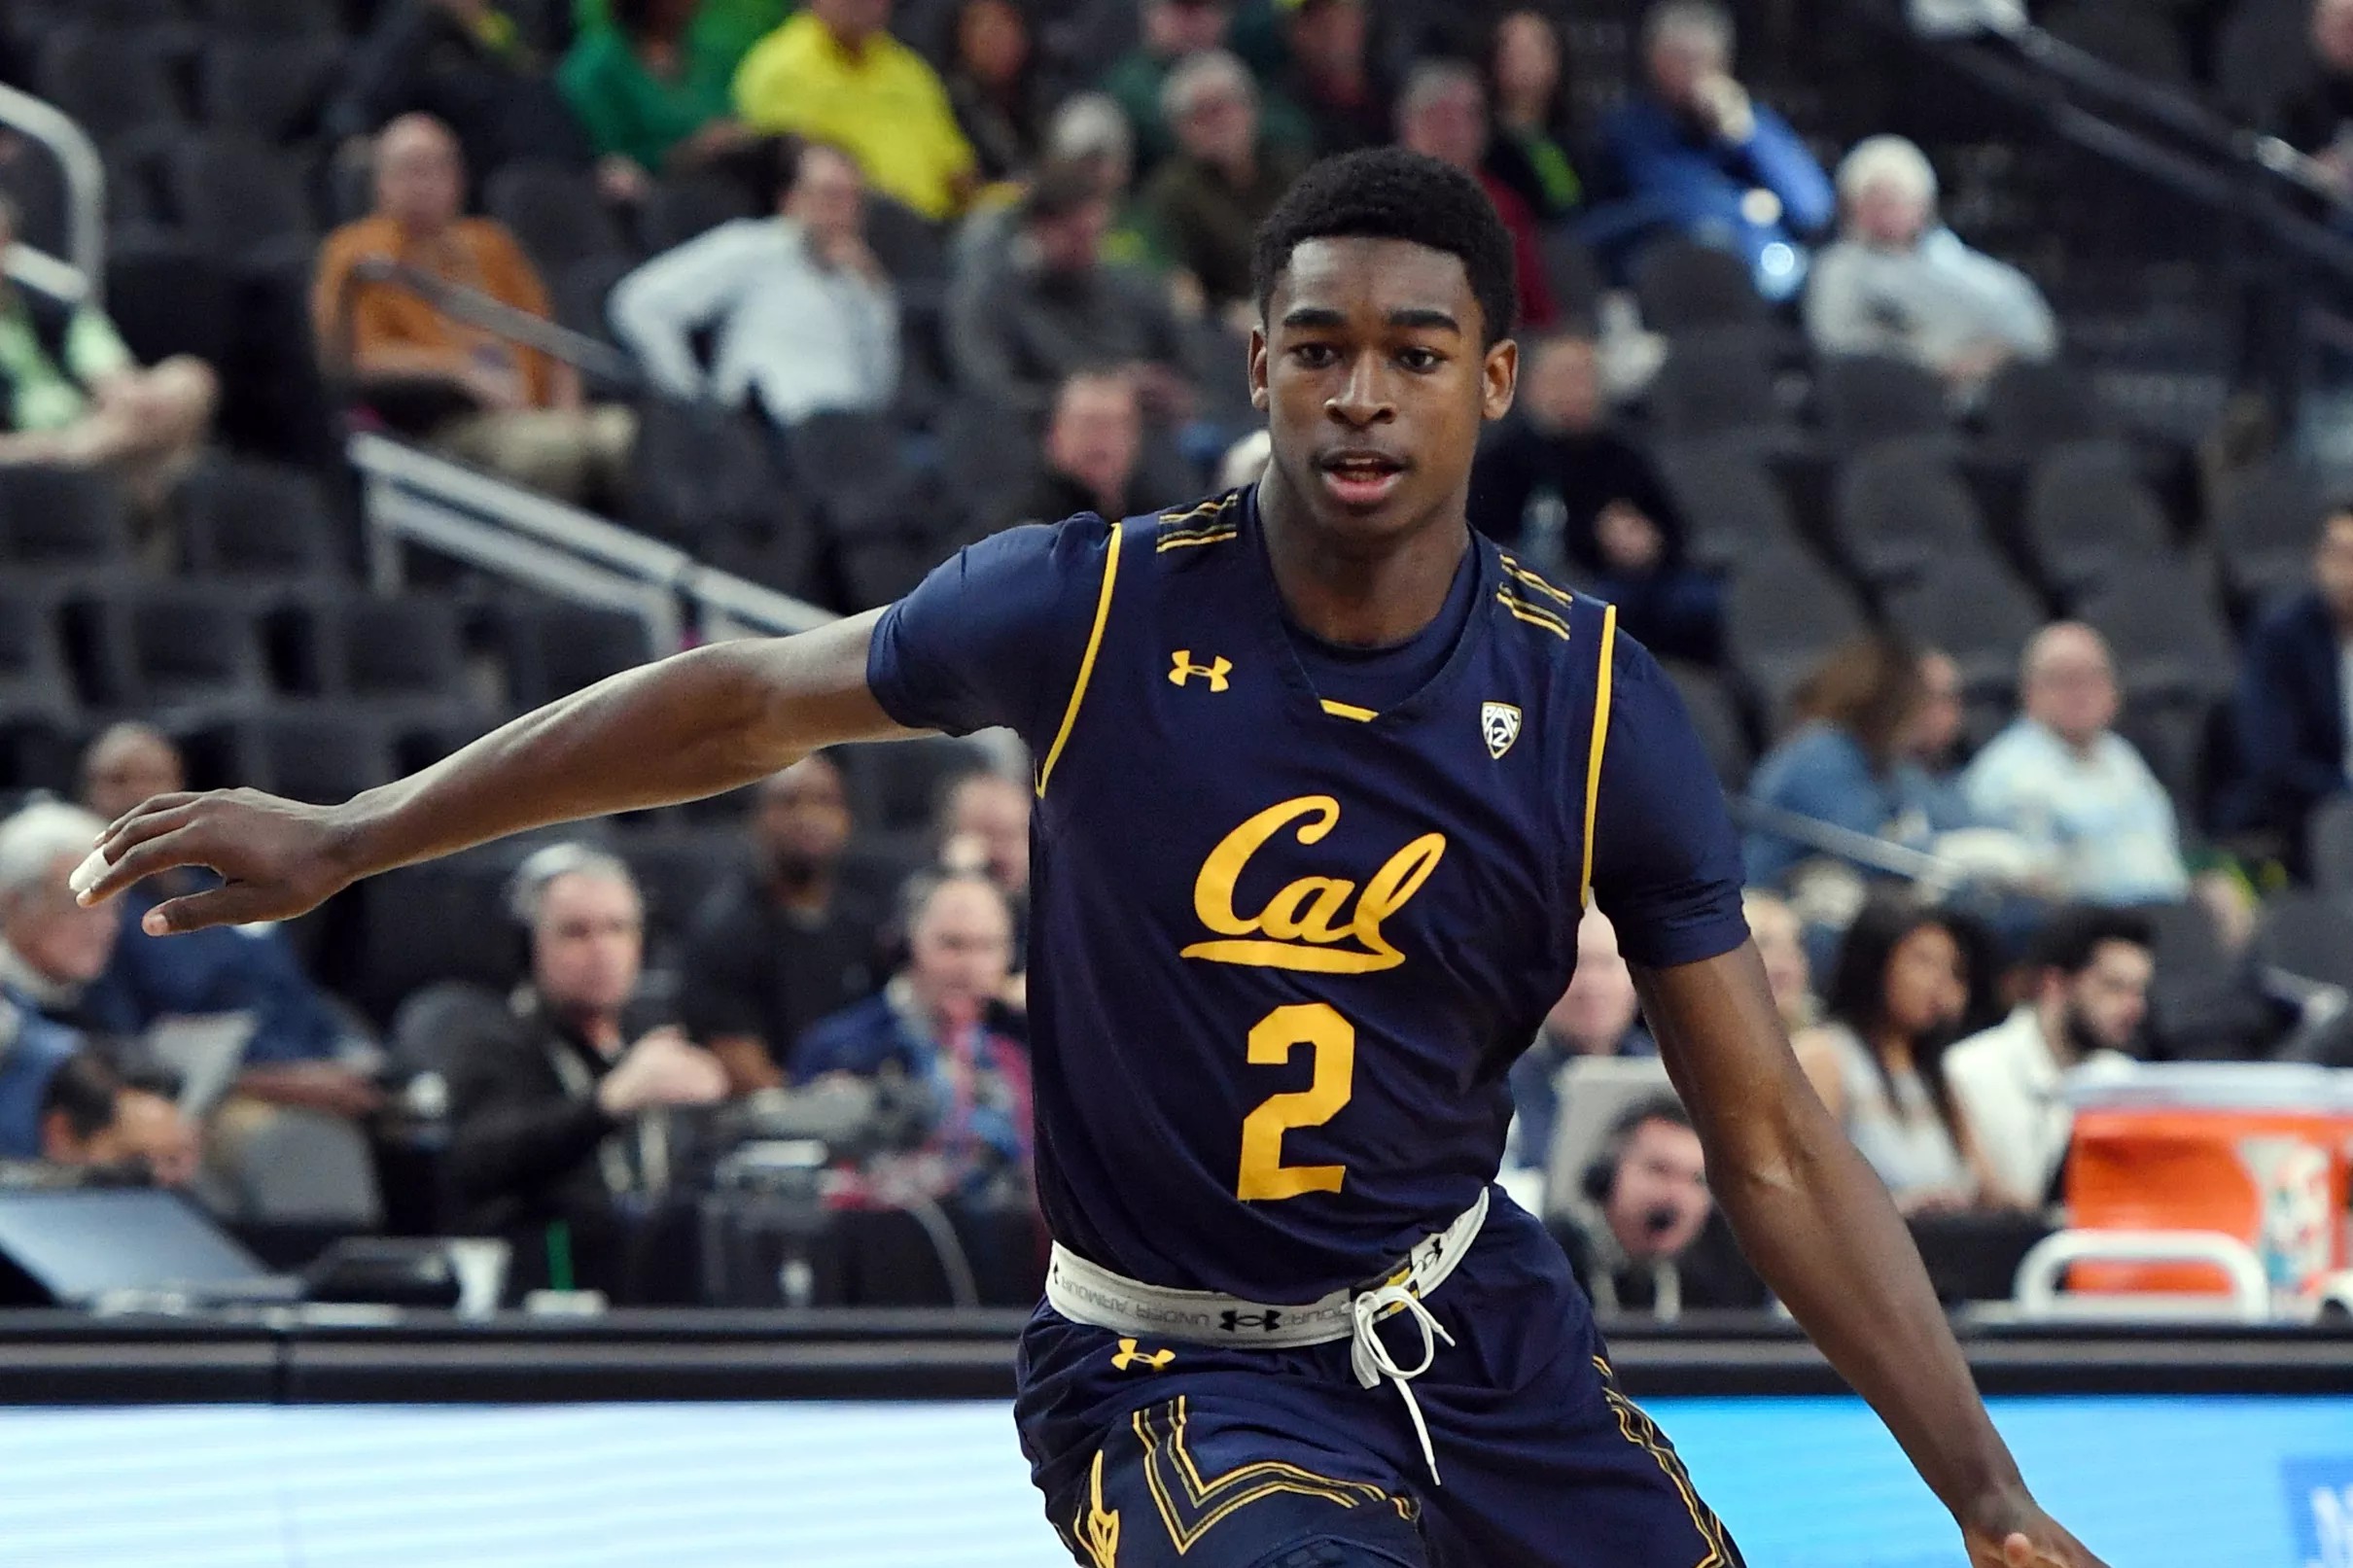 Cal Basketball Game Cancelled Due to Air Quality Concerns